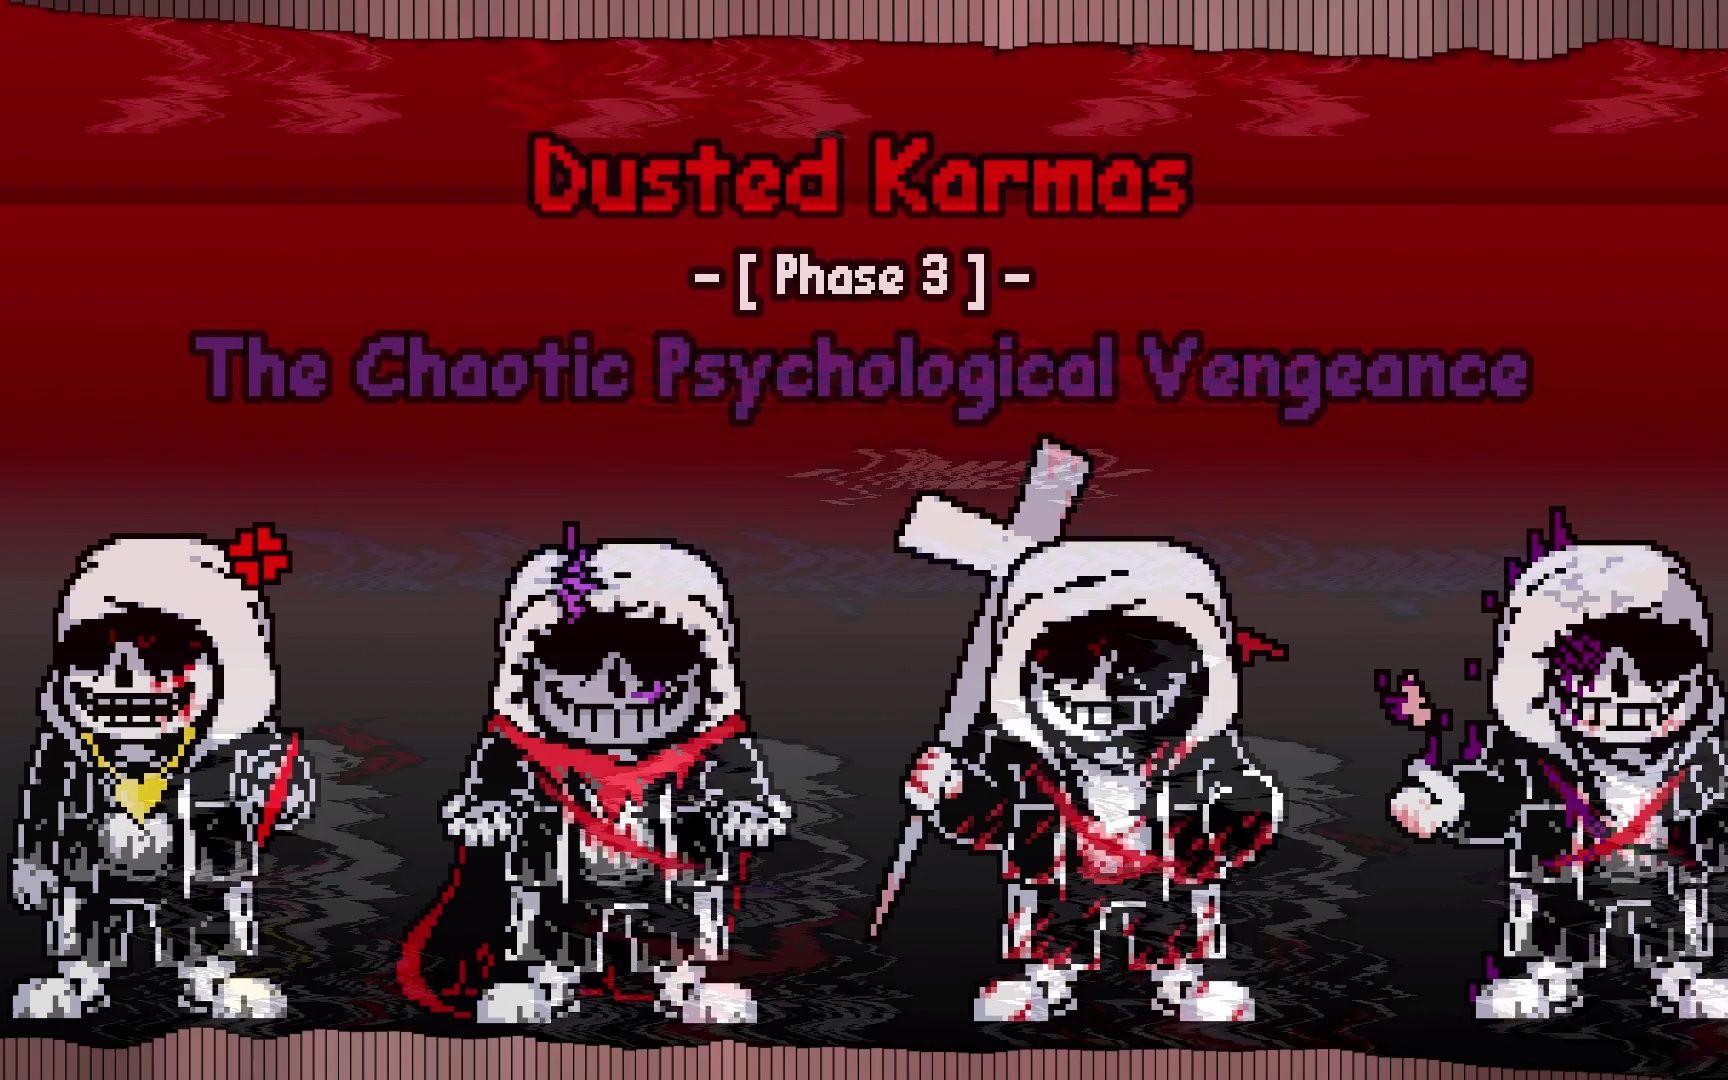 [Dusted Karmas]C2-OST 018 Phase 3-The Chaotic Psychological Vengeance/混乱癫狂复仇